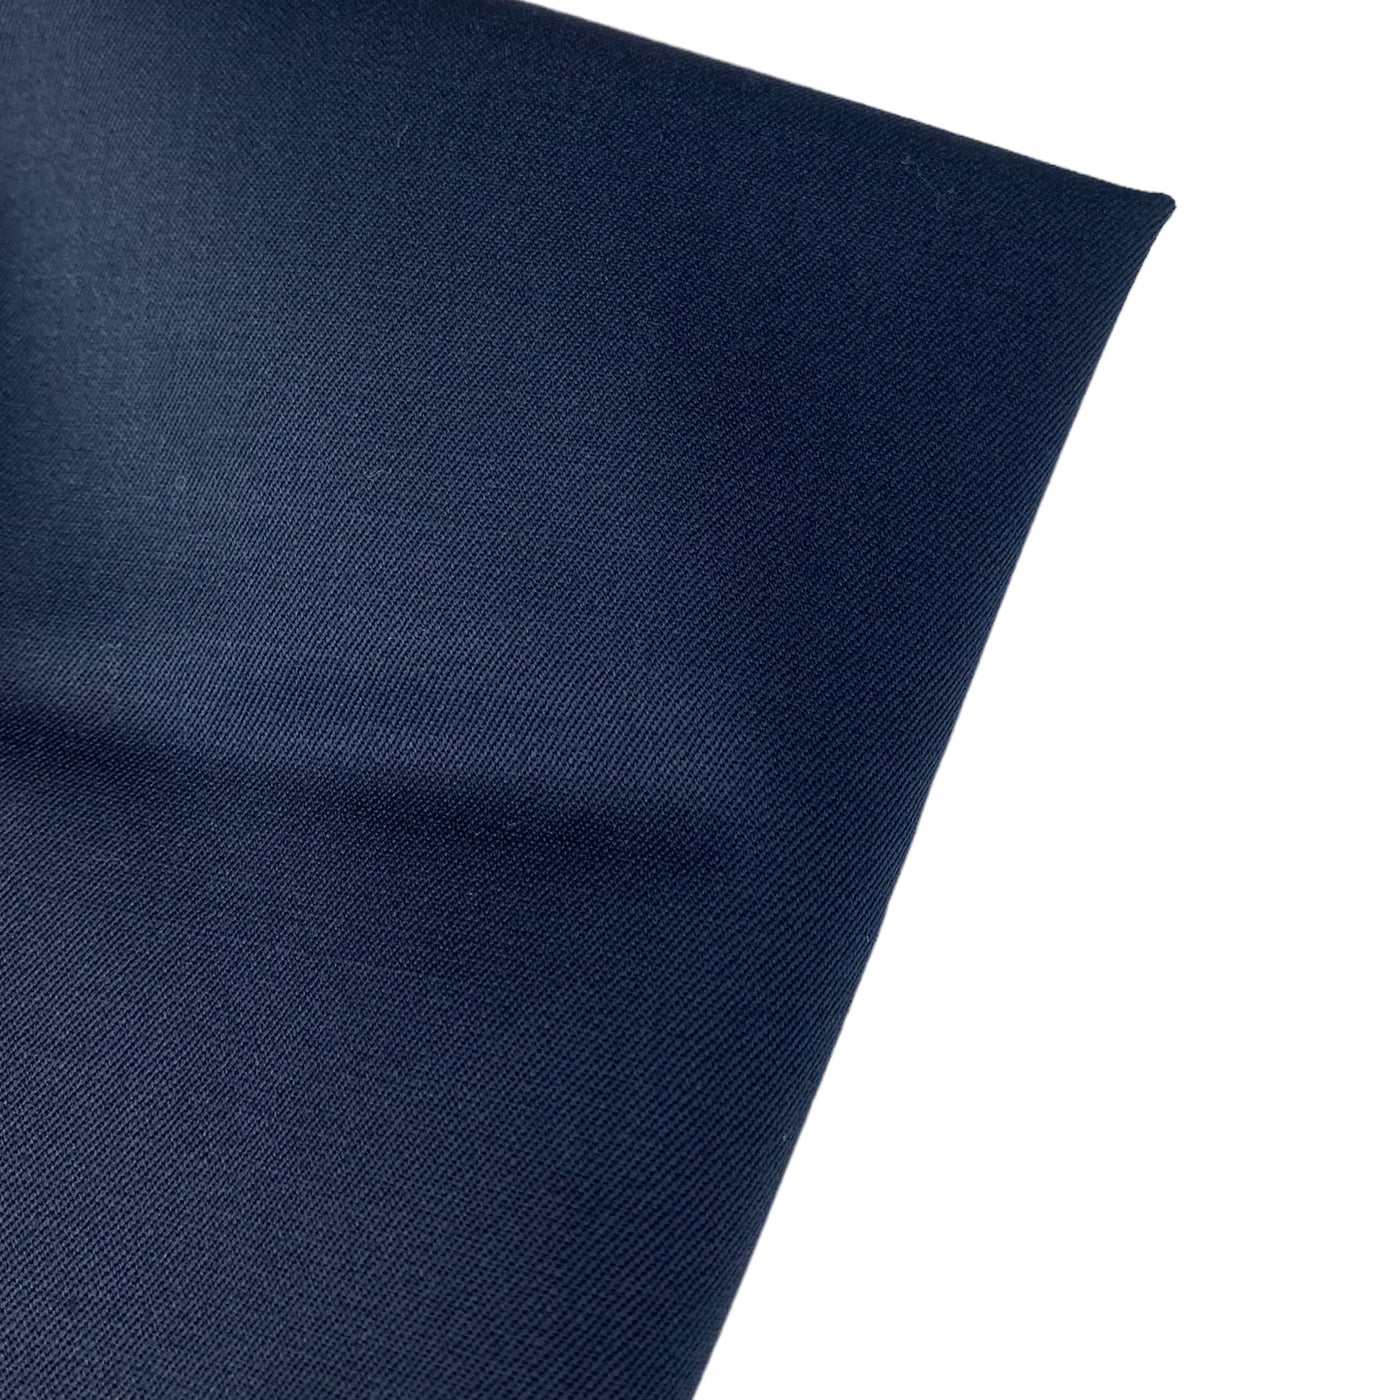 Wool Twill Suiting - Remnant - Navy Blue